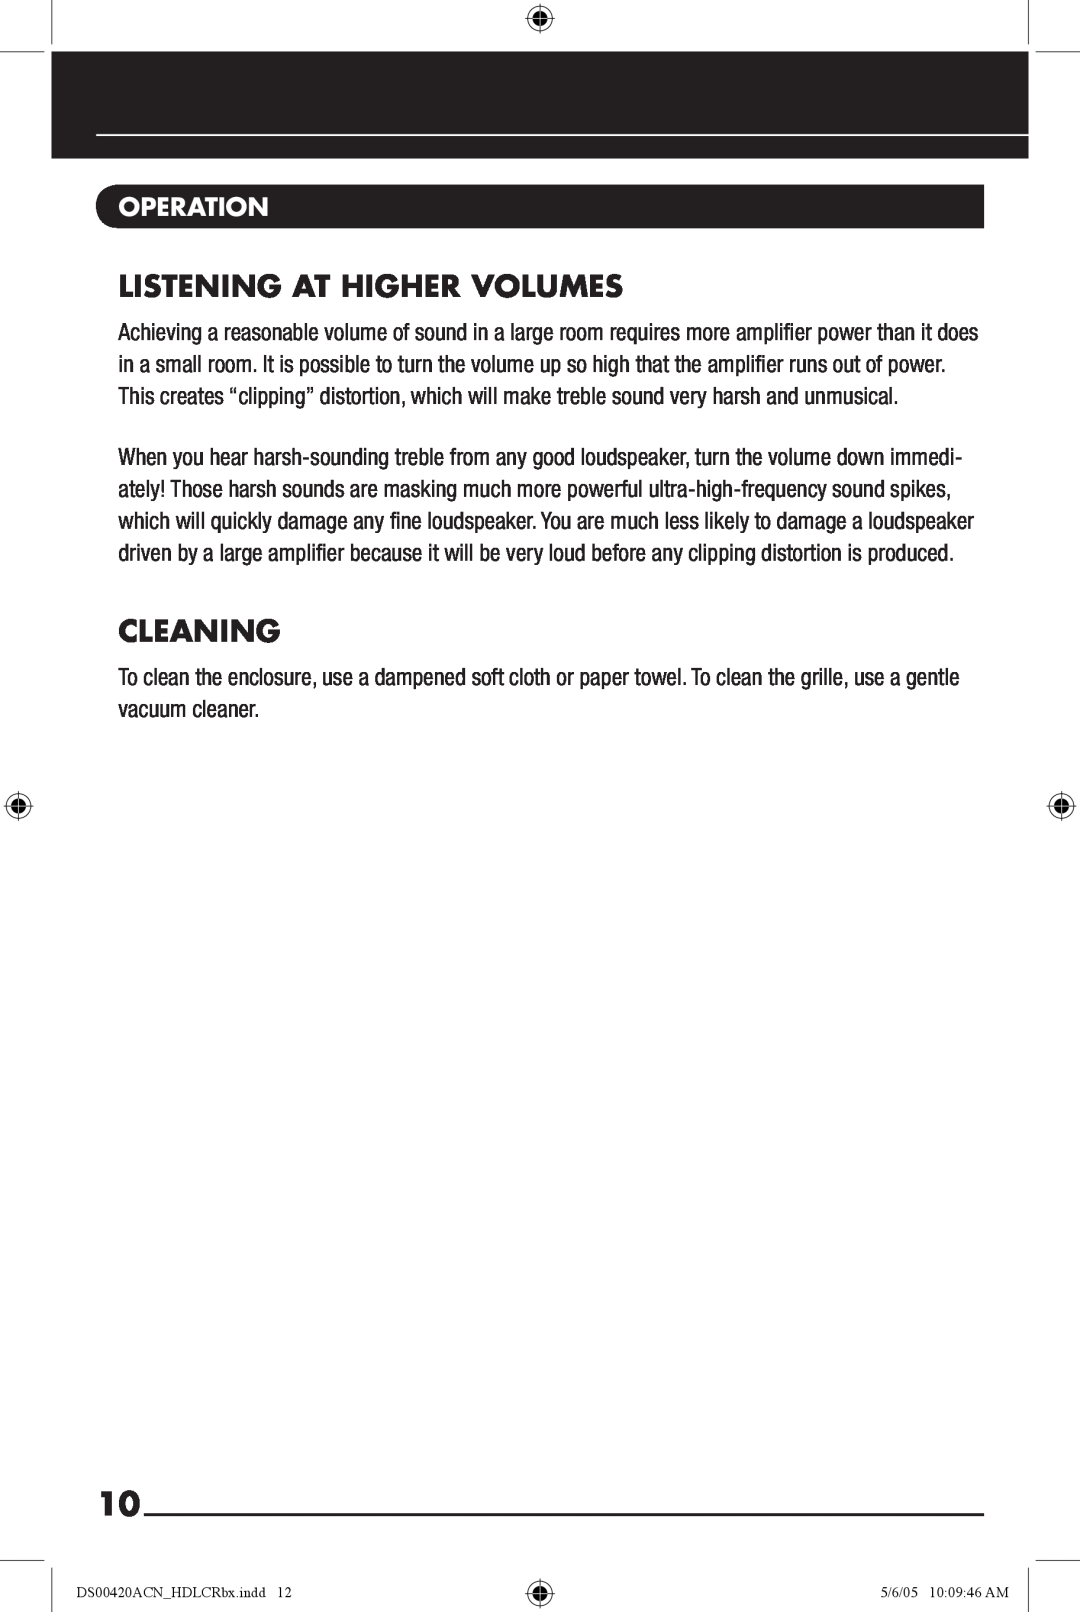 Niles Audio DS00420ACN manual Listening At Higher Volumes, Cleaning, Operation 